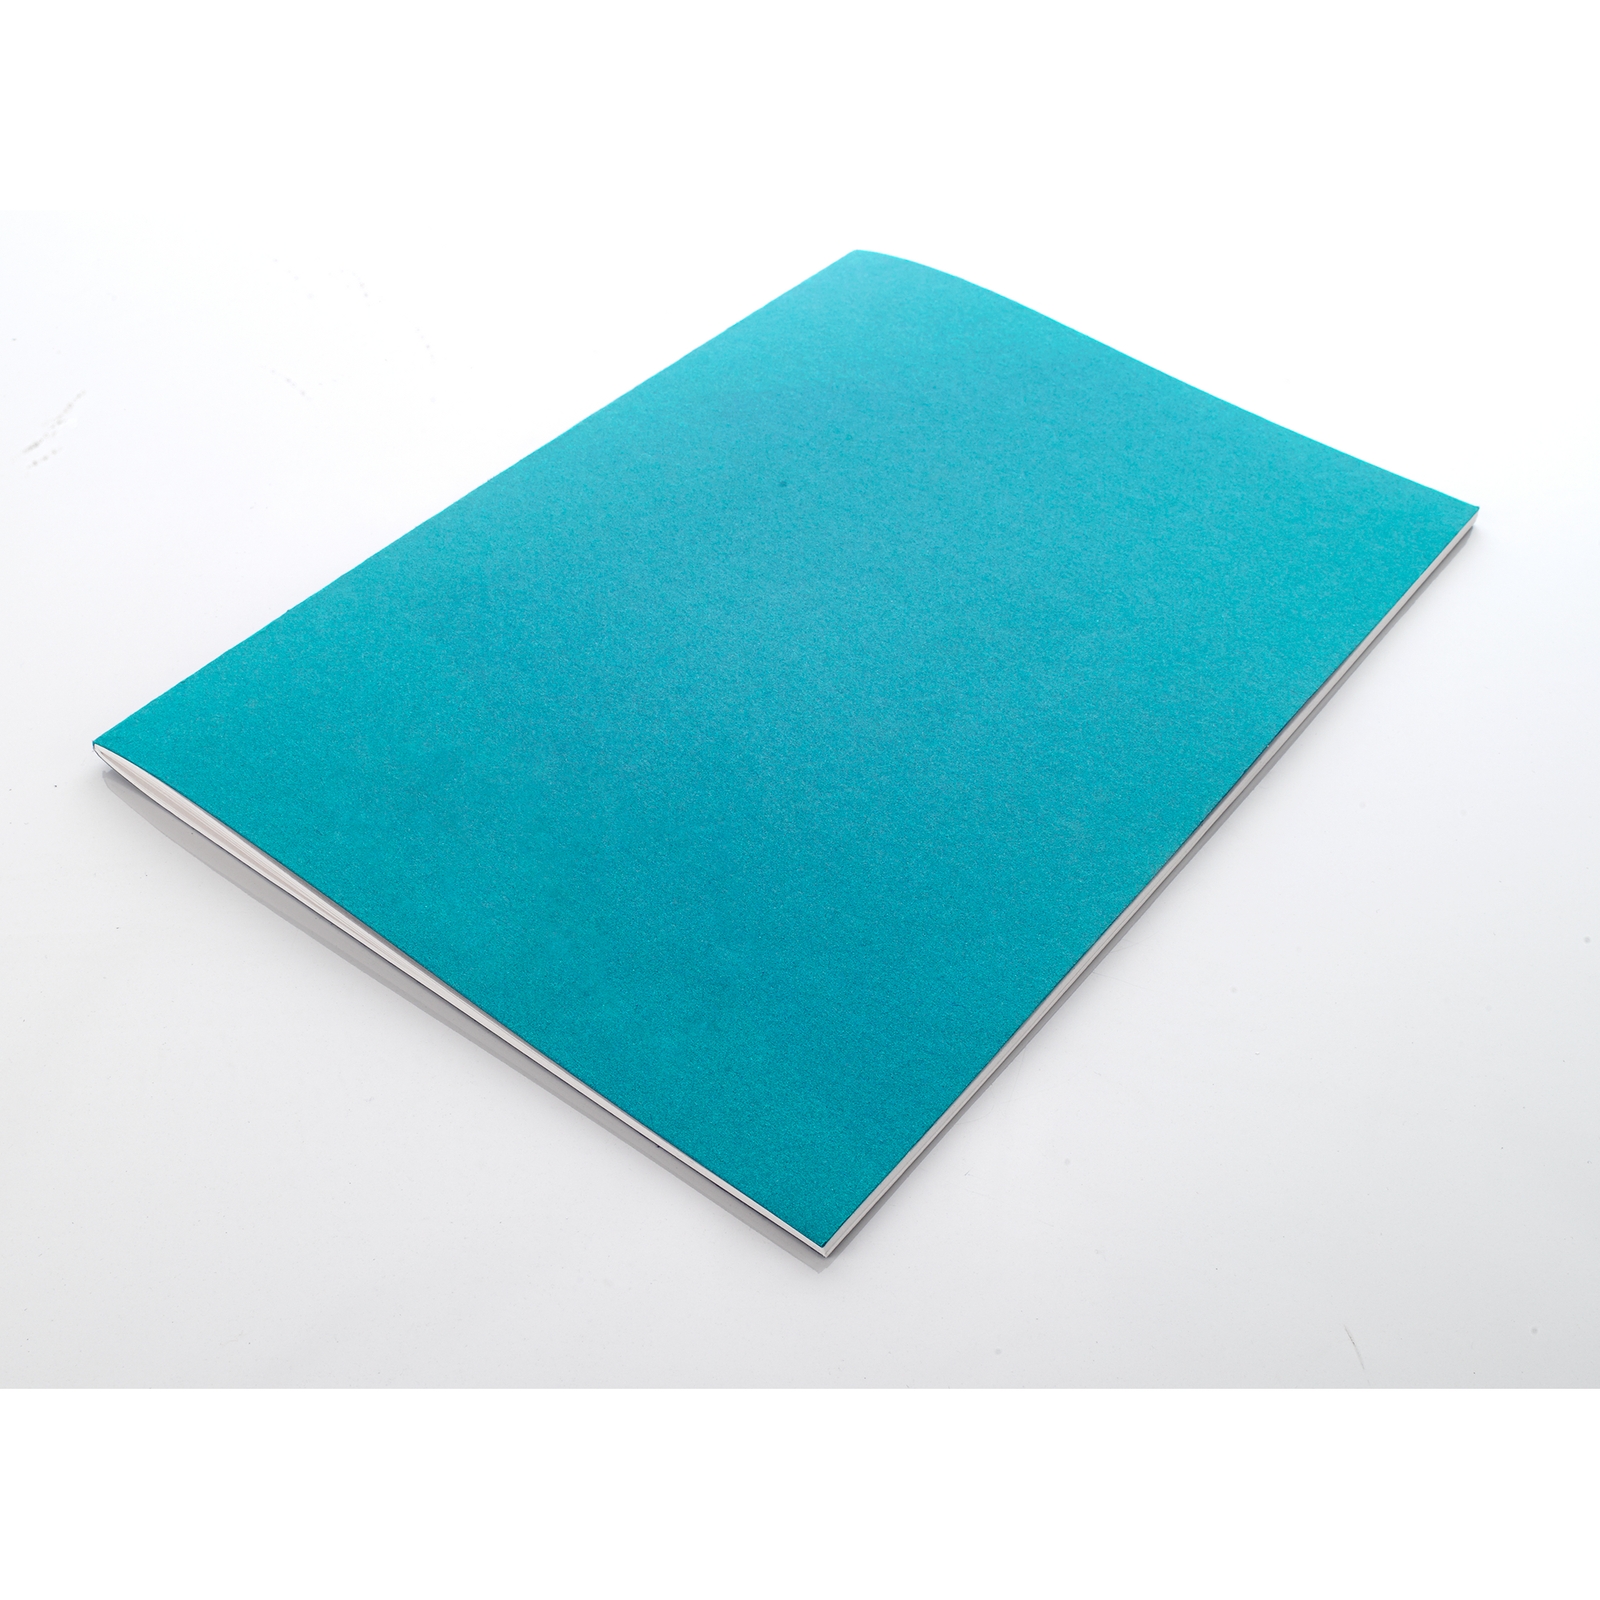 Specialist Crafts Blue Cover Stapled Sketchbooks - 105gsm - 40 Page - Pack of 10